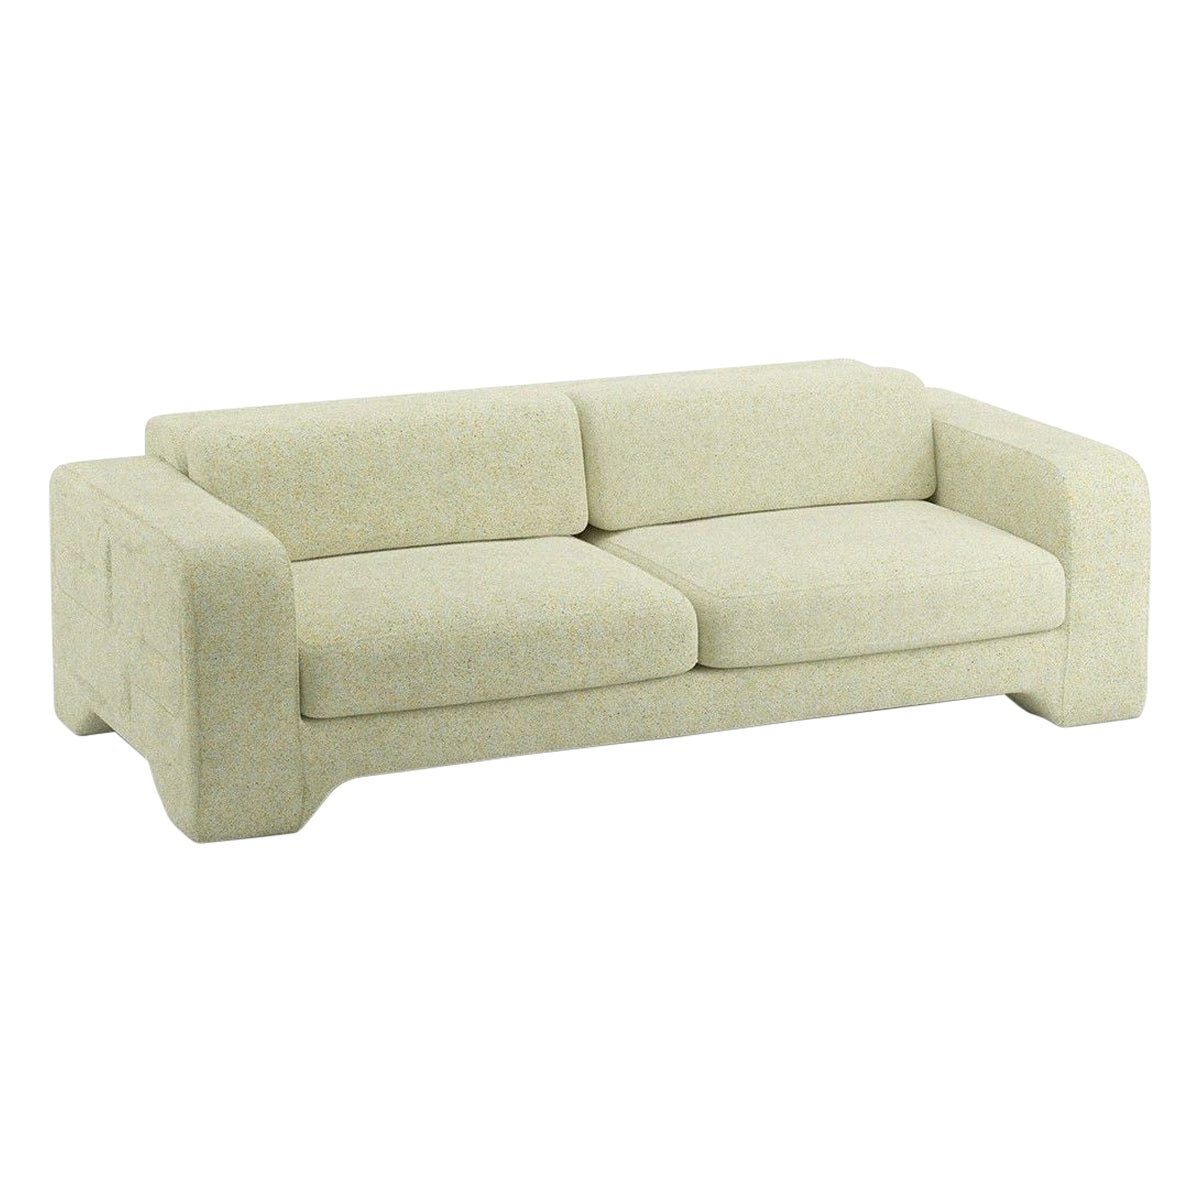 Popus Editions Giovanna 4 Seater Sofa in Sage Zanzi Linen & Wool Blend Fabric For Sale